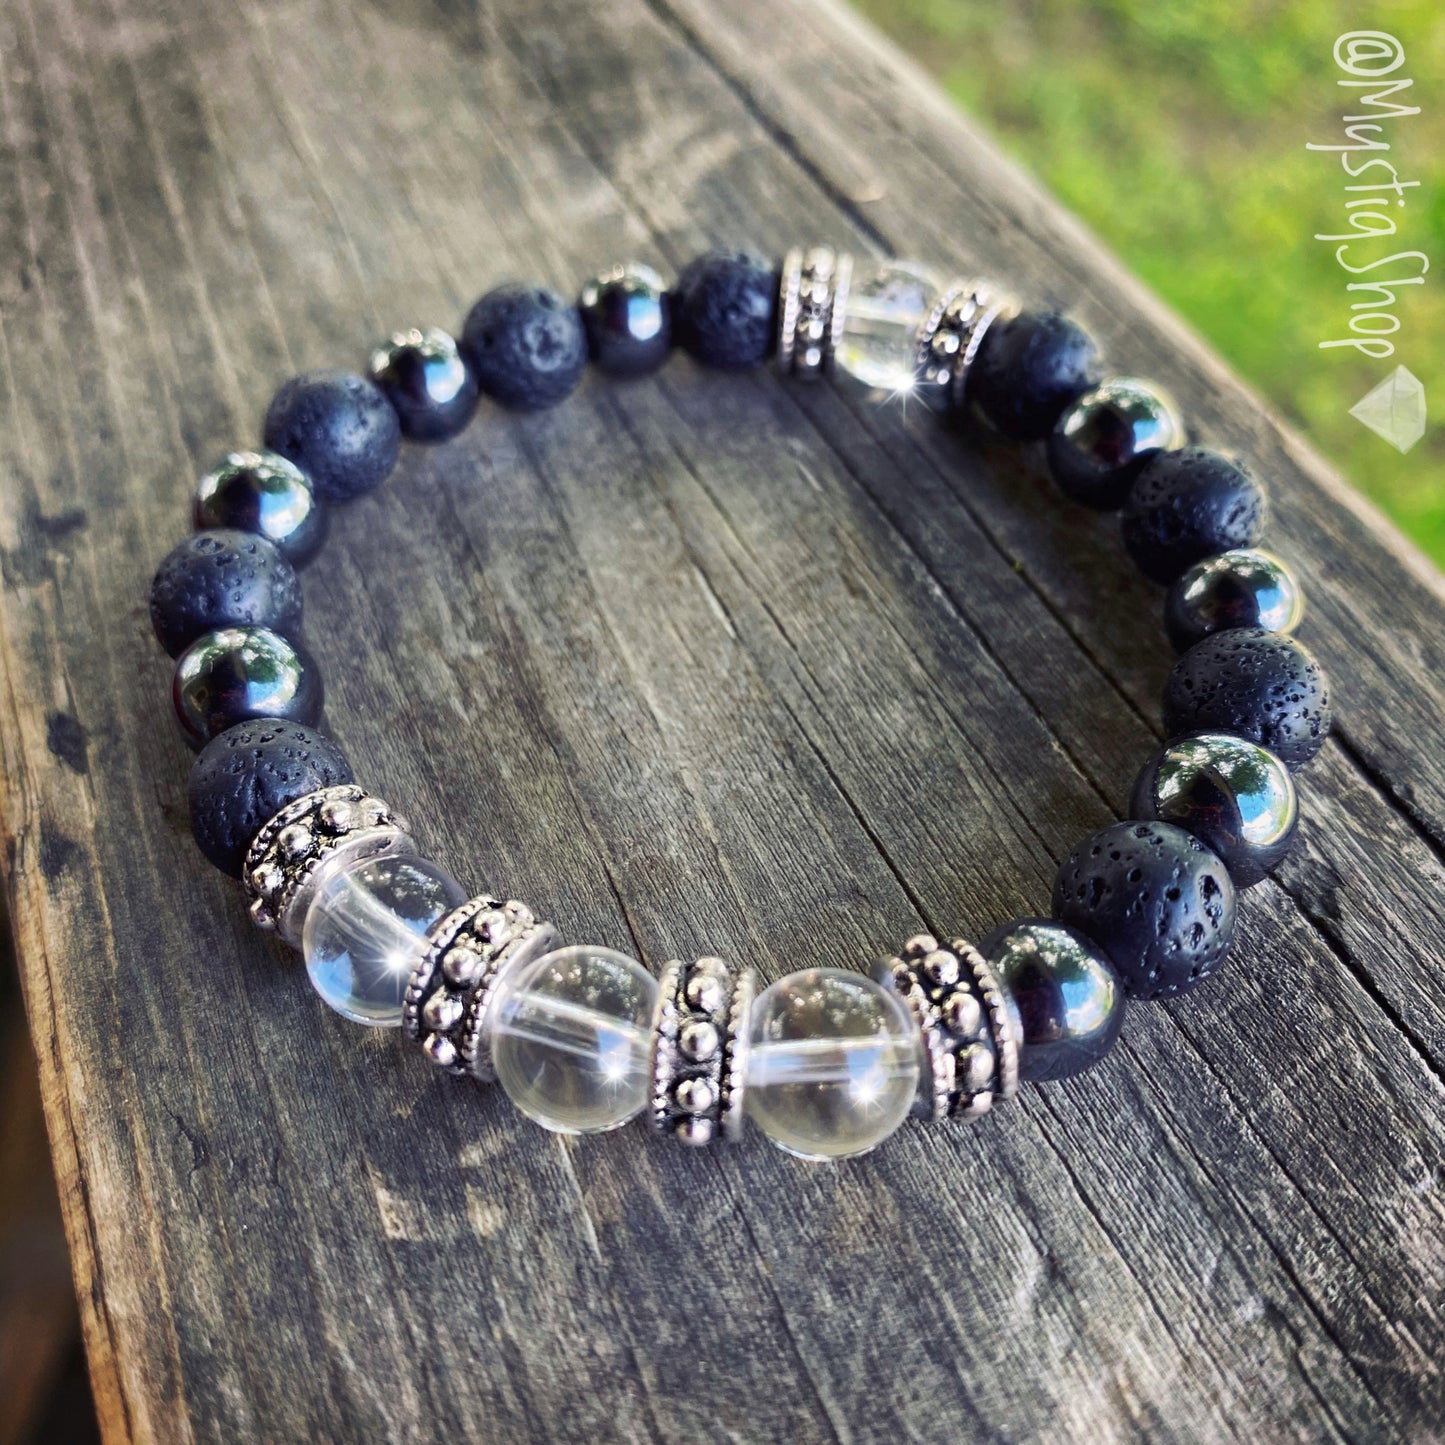 💎”Grounded Clarity” Diffuser Bracelets